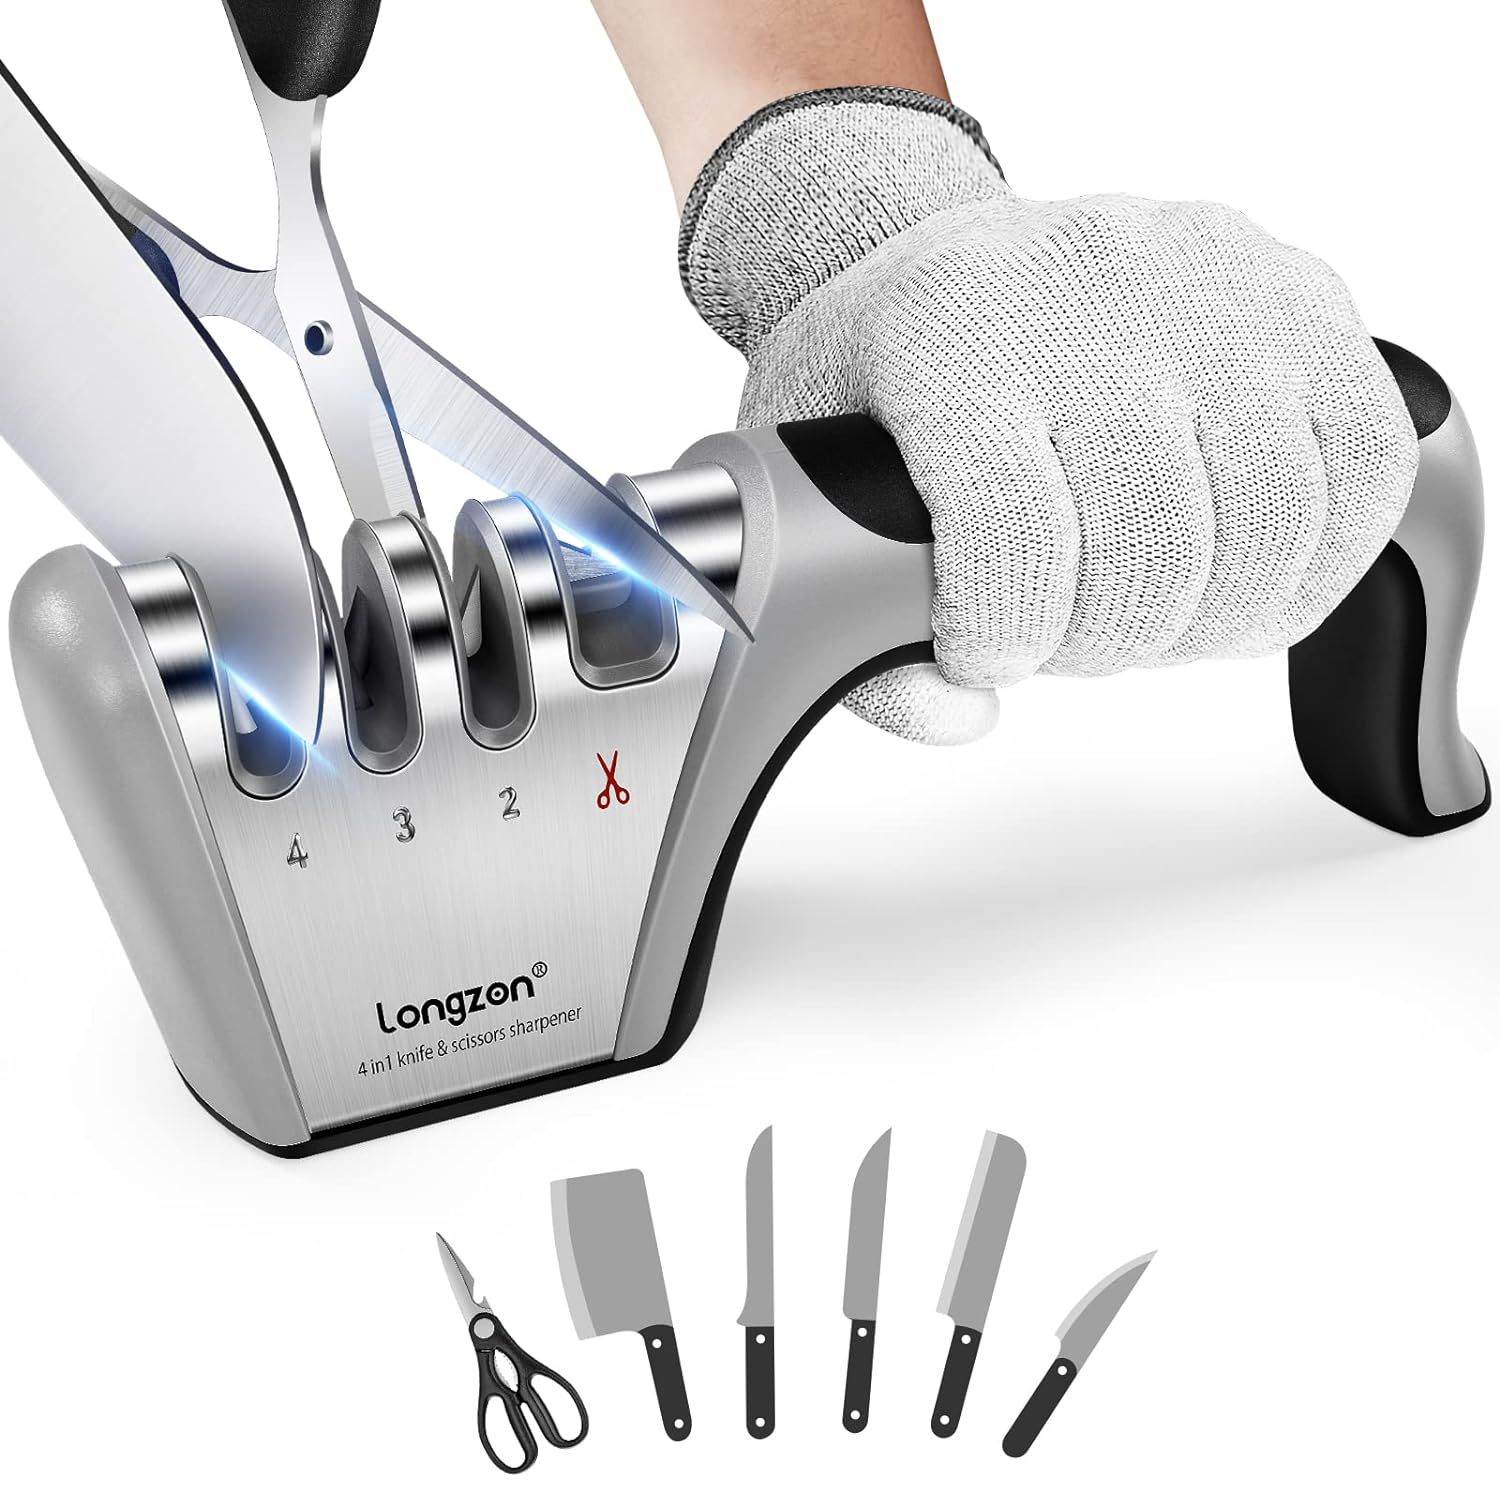 KD 4-In-1 Knife Sharpener with a Pair of Cut-Resistant Glove